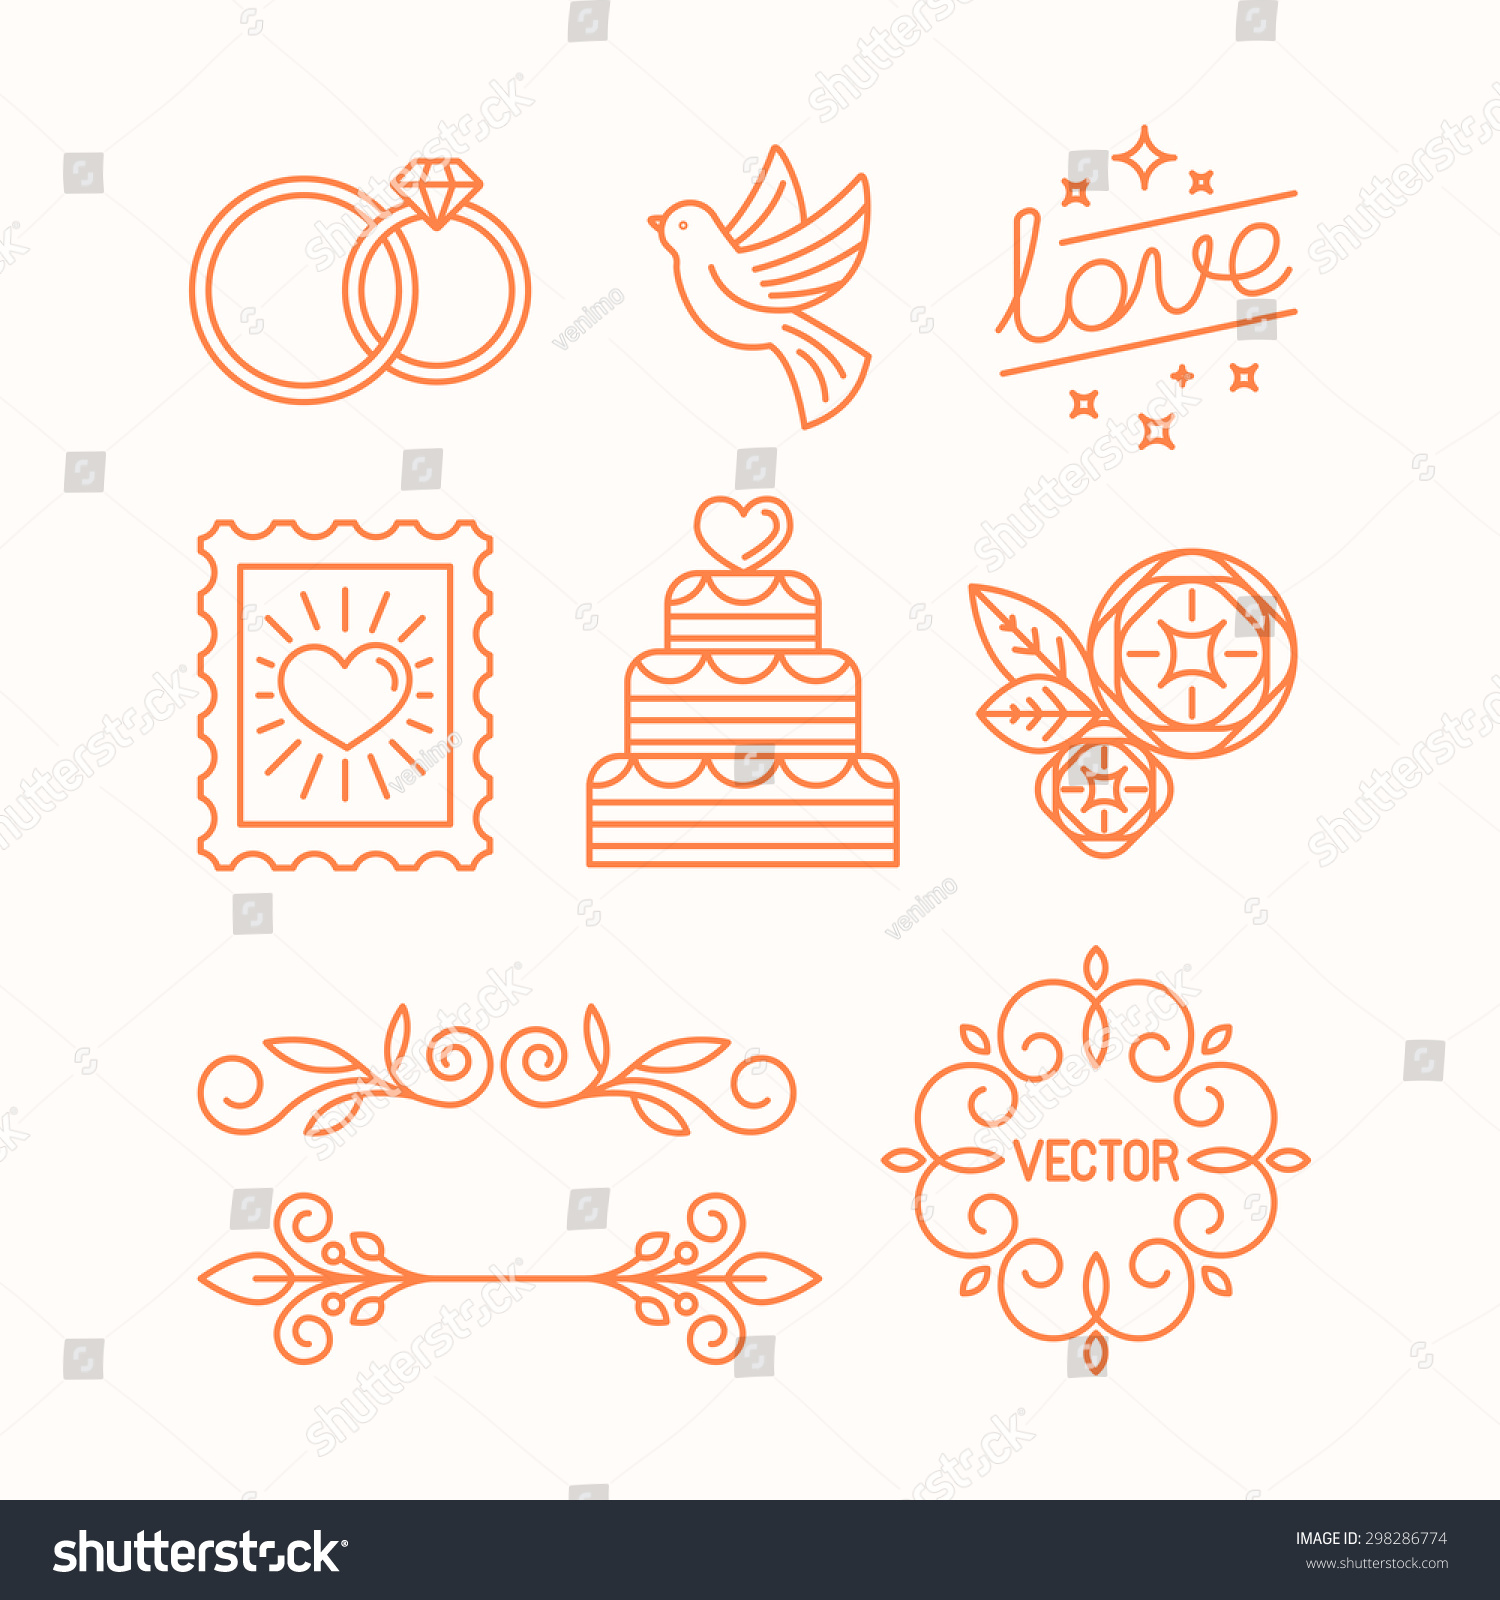 Vector linear design elements, icons and frame for wedding invitations and stationery - decoration set in trendy linear style #298286774